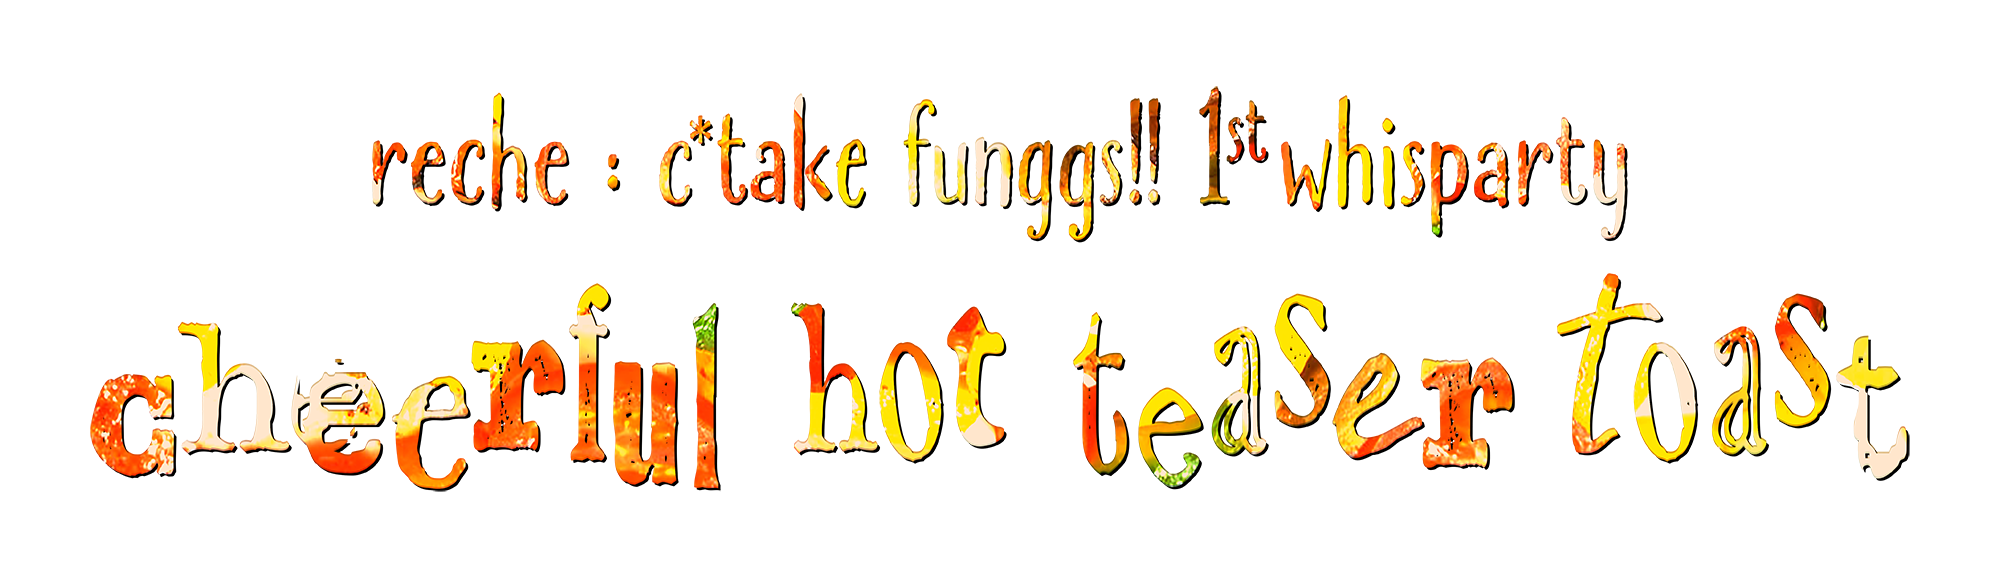 reche : c*take funggs!! 1st whisparty cheerful hot teaser toast